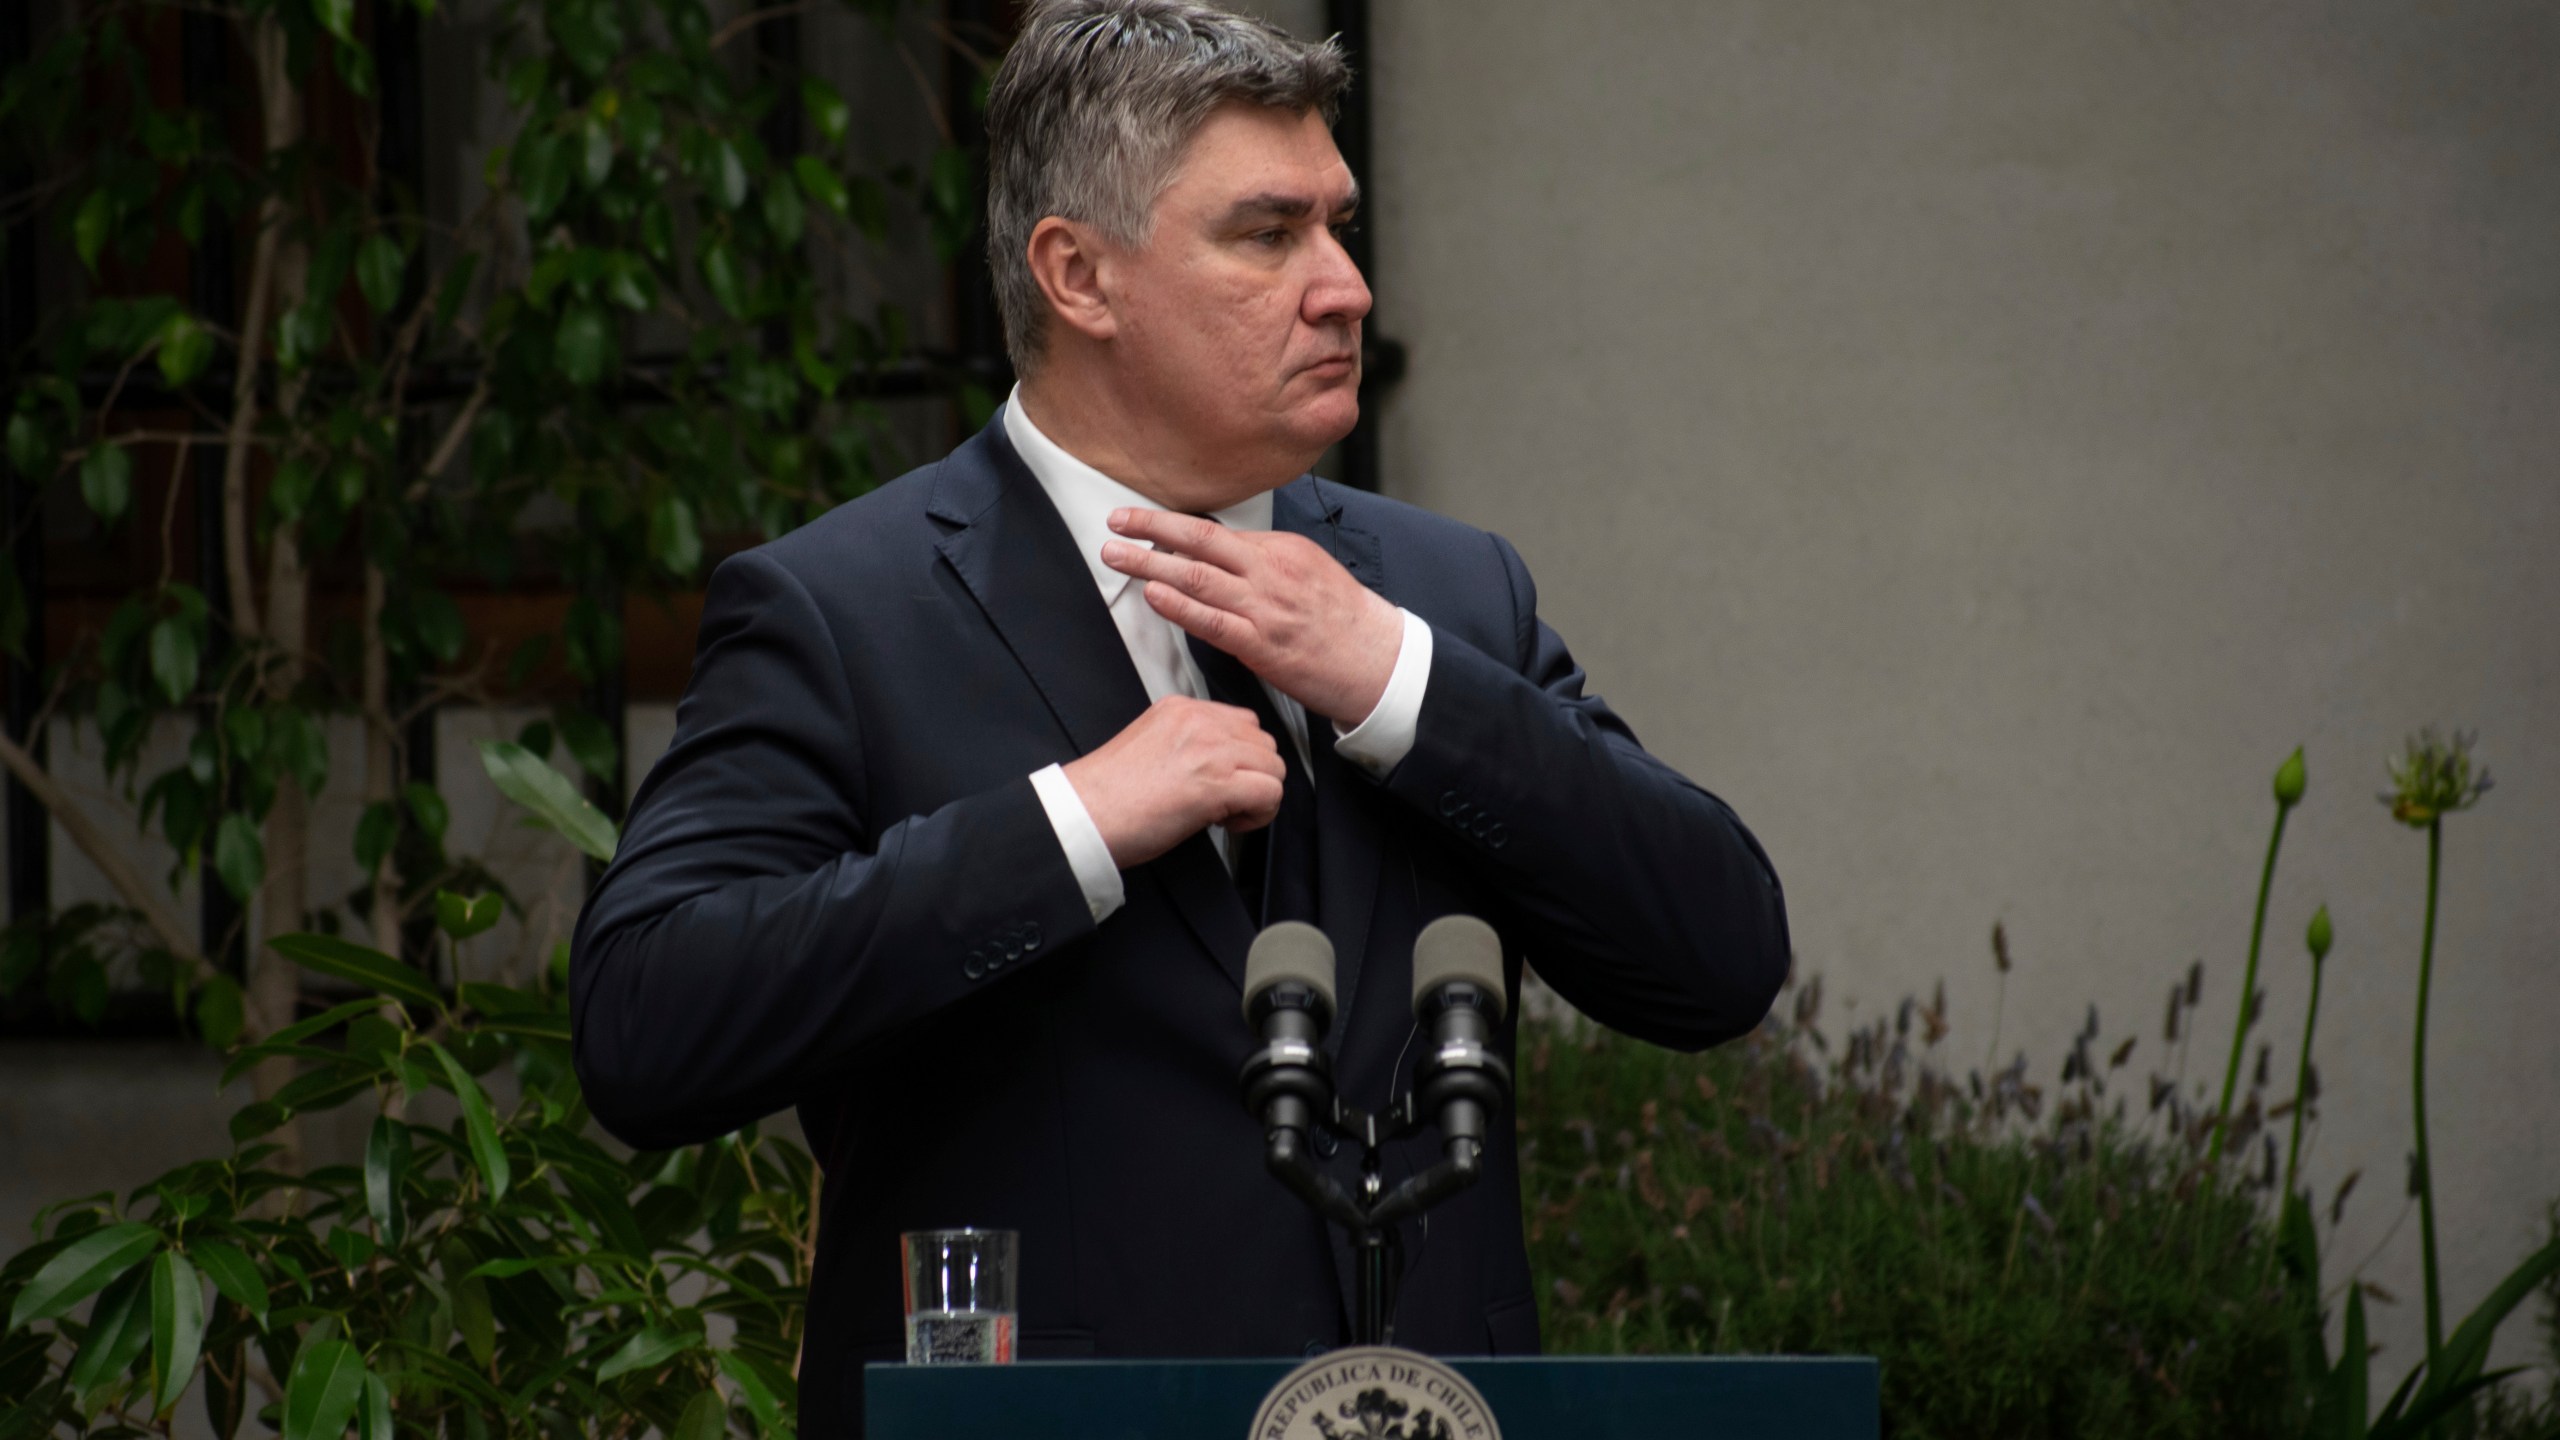 FILE - Croatia's President Zoran Milanovic adjusts his tie at a press conference with Chilean President Gabriel Boric at La Moneda Presidential palace in Santiago, Chile, on Dec. 12, 2022. Milanovic cannot run for prime minister nor take part in the upcoming parliamentary election nor campaign in favor of an opposition party unless he resigns immediately from the current post, the state’s constitutional court ruled Monday, March 18, 2024. (AP Photo/Matias Basualdo, File)